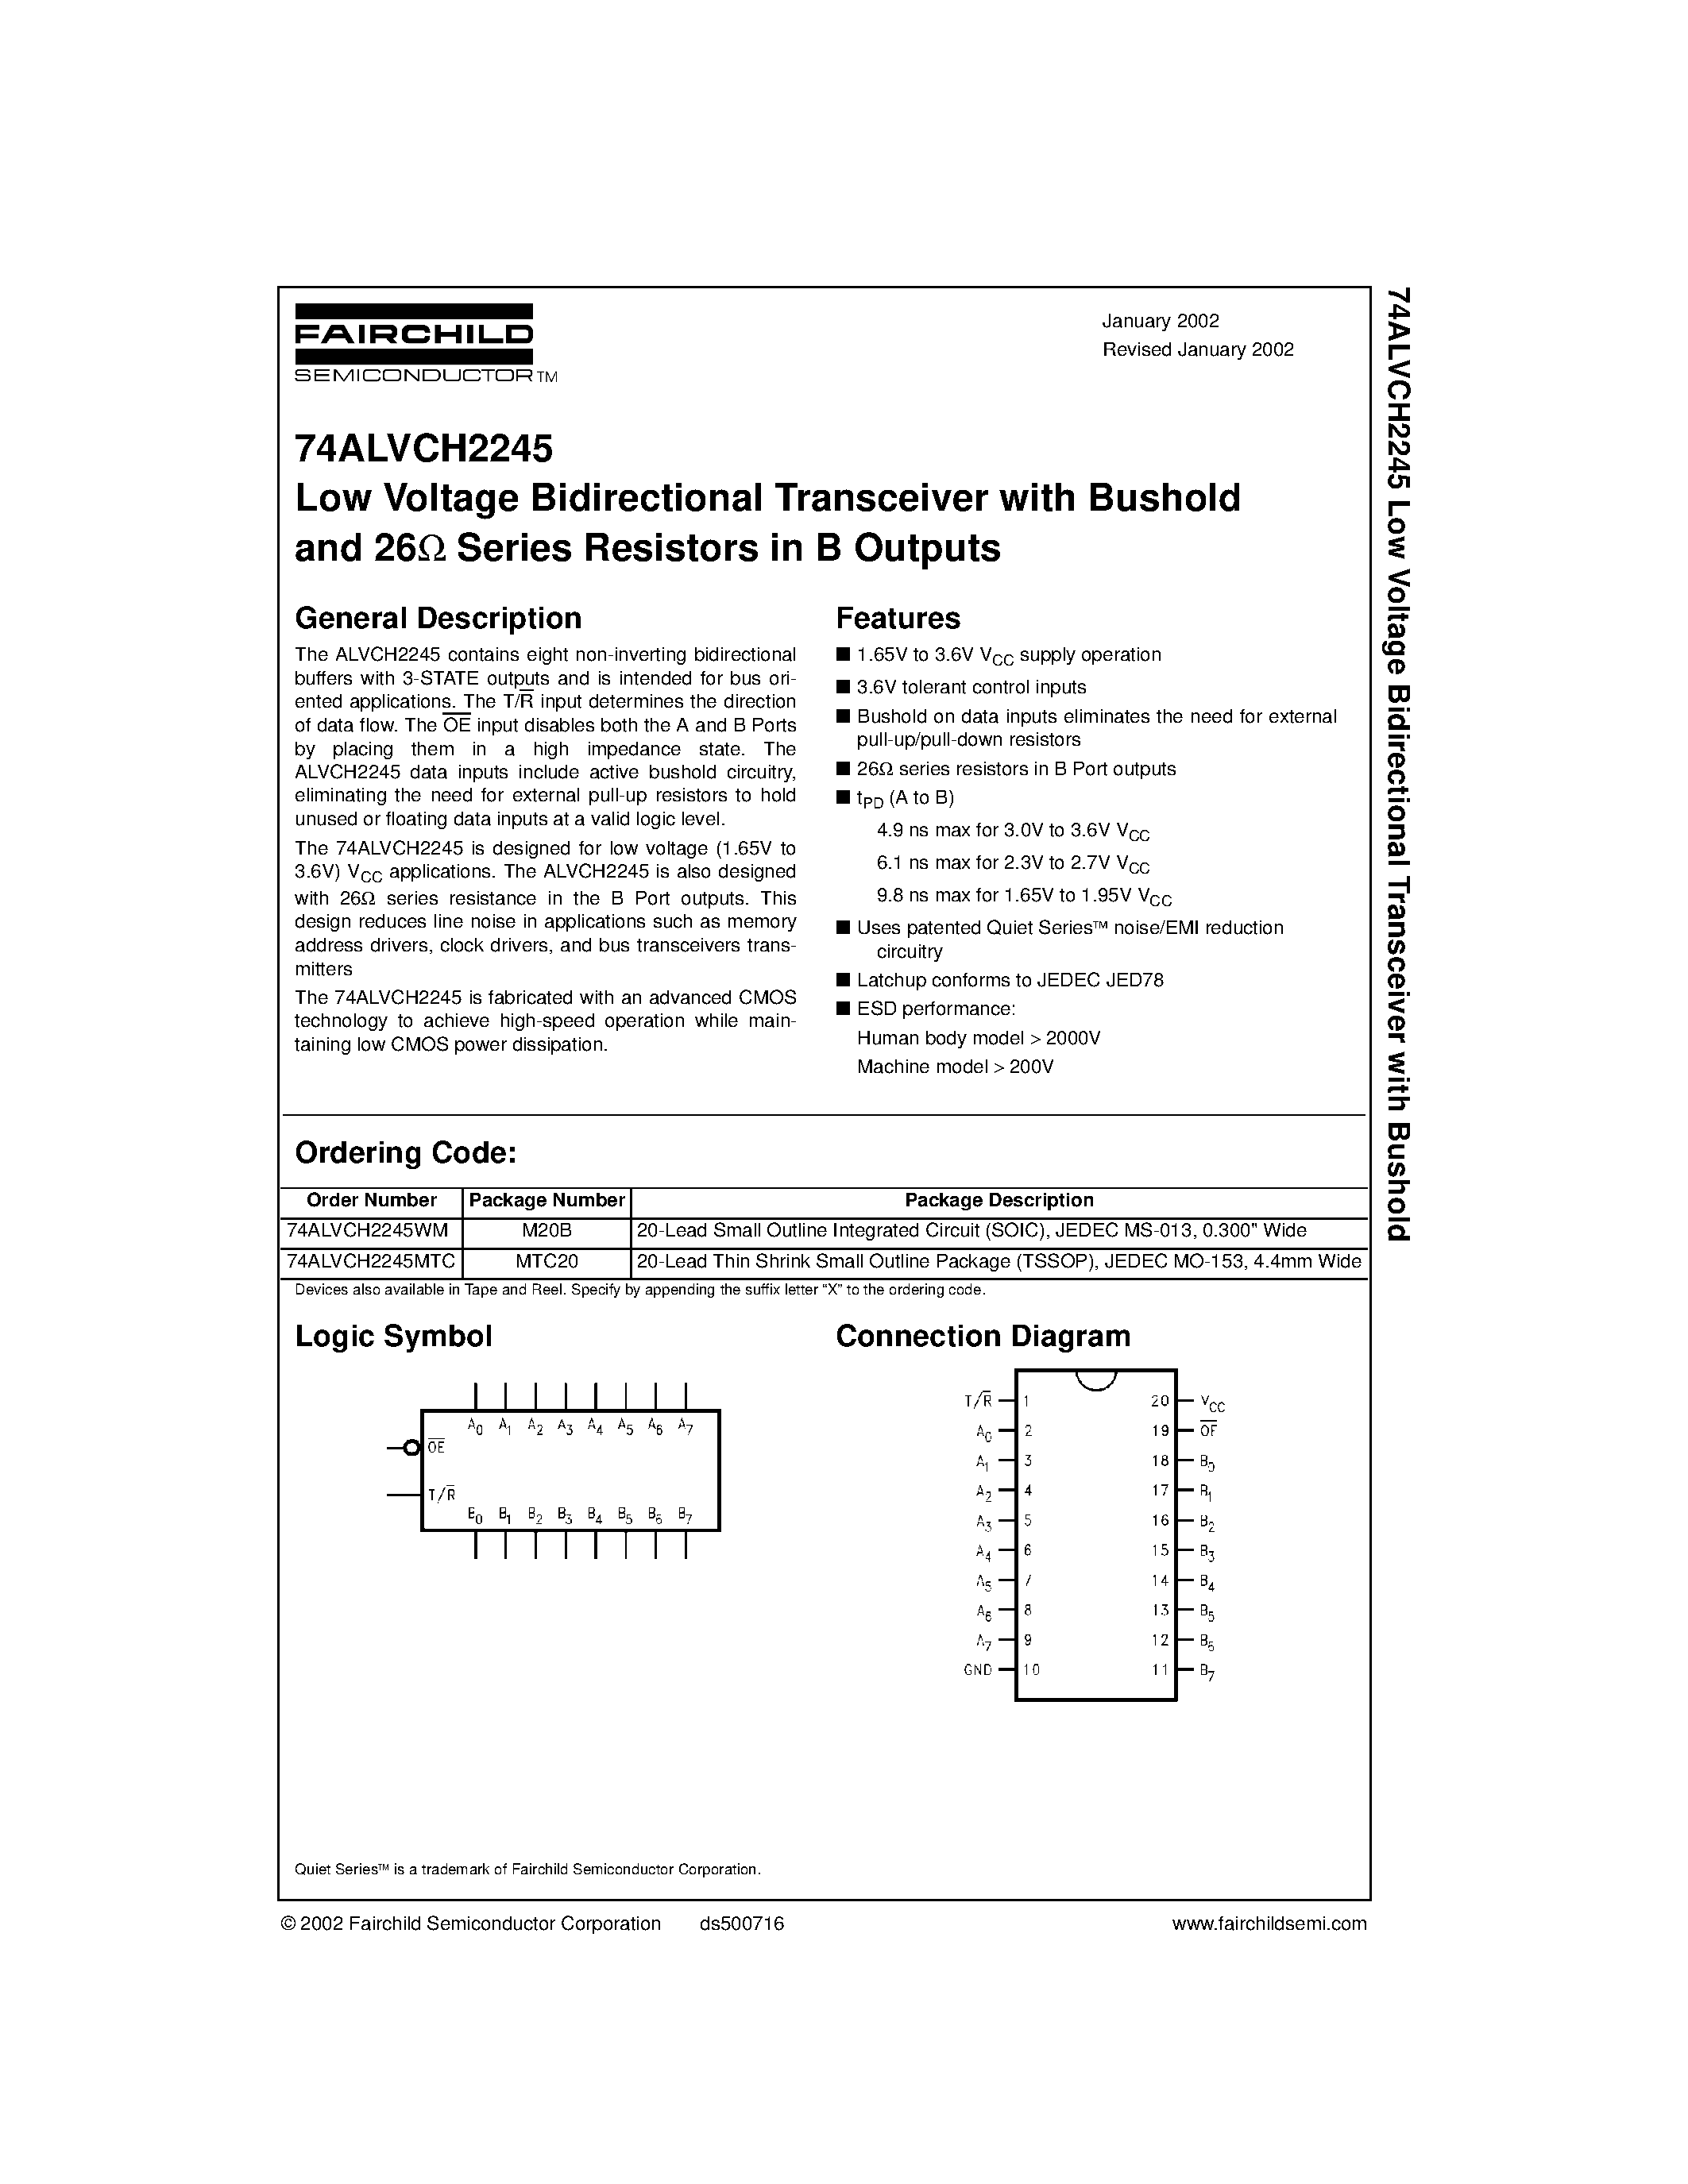 Datasheet 74ALVCH2245WM - Low Voltage Bidirectional Transceiver with Bushold and 26 Series Resistors in B Outputs page 1